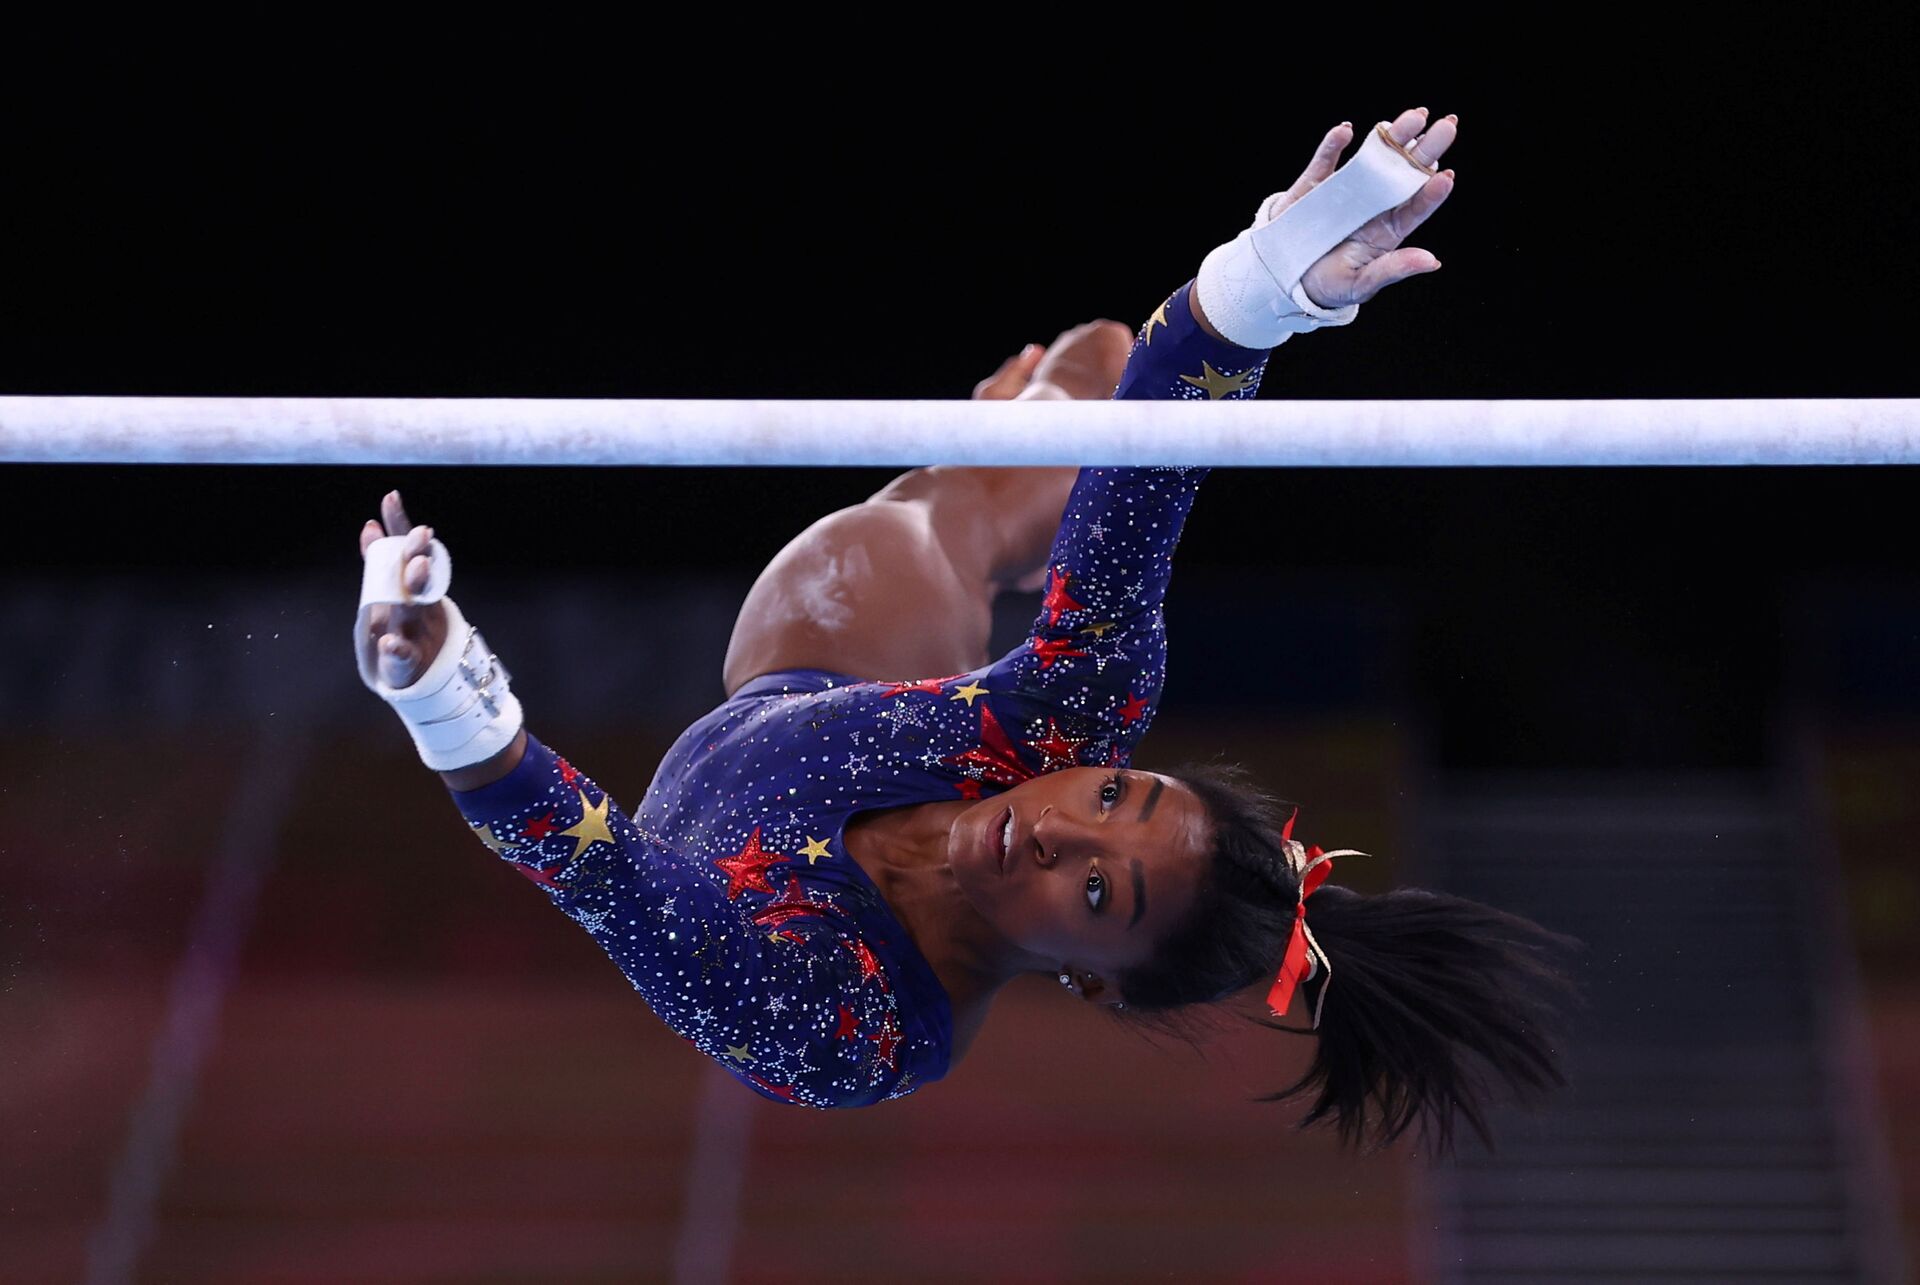 Tokyo 2020 Olympics - Gymnastics - Artistic - Women's Uneven Bars - Qualification - Ariake Gymnastics Centre, Tokyo, Japan - July 25, 2021. Simone Biles of the United States in action during the uneven bars REUTERS/Mike Blake/File photo  SEARCH OLYMPICS DAY 3 FOR TOKYO 2020 OLYMPICS EDITOR'S CHOICE, SEARCH REUTERS OLYMPICS TOPIX FOR ALL EDITOR'S CHOICE PICTURES. - Sputnik International, 1920, 07.09.2021